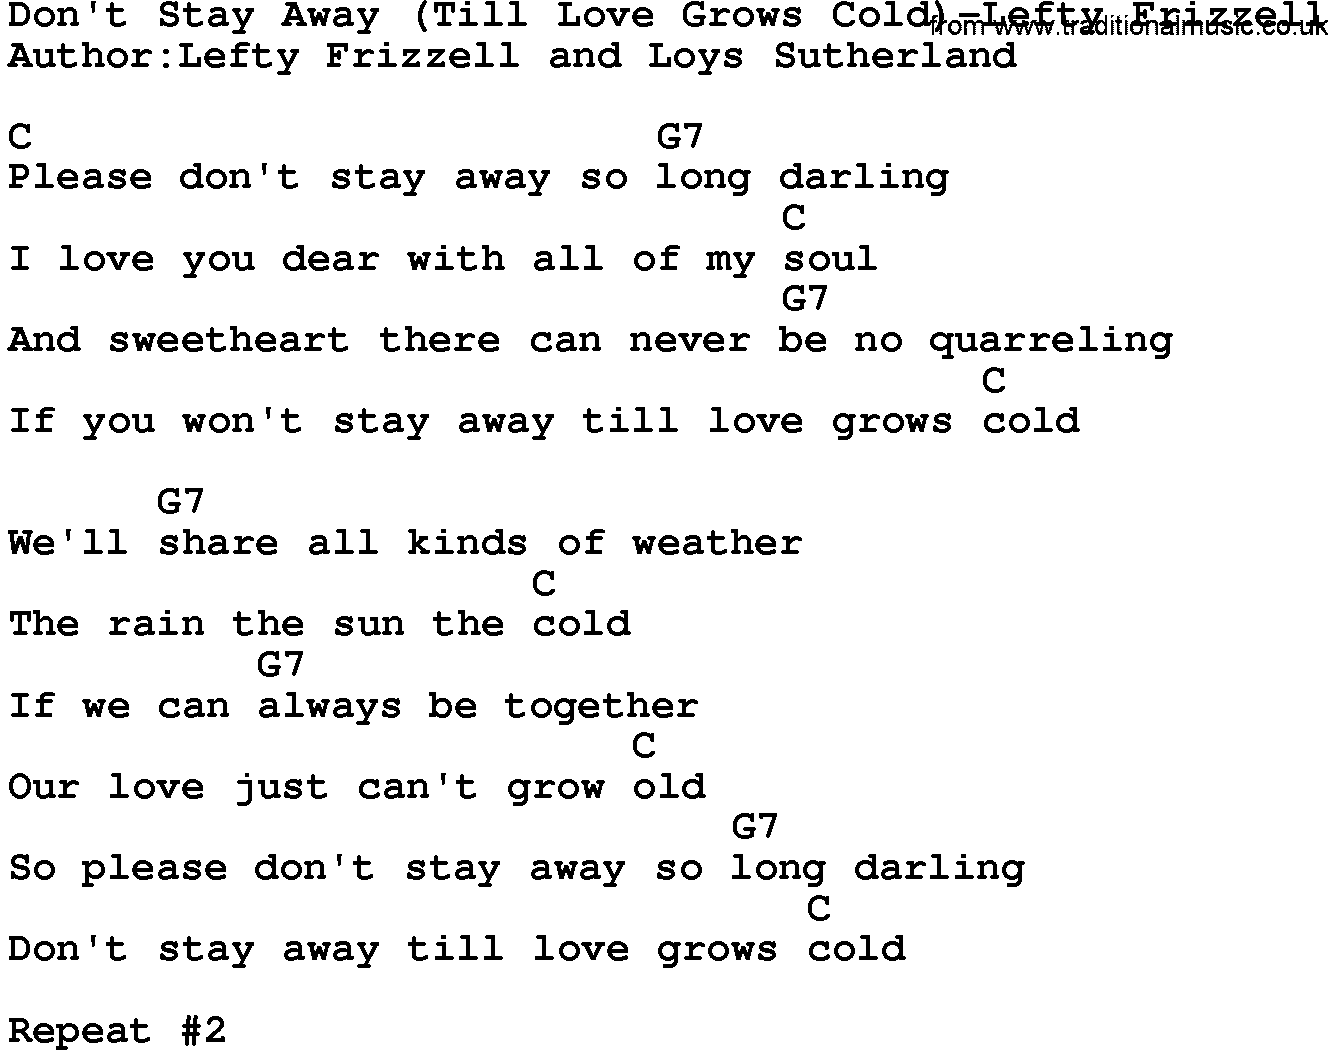 Country music song: Don't Stay Away(Till Love Grows Cold)-Lefty Frizzell lyrics and chords